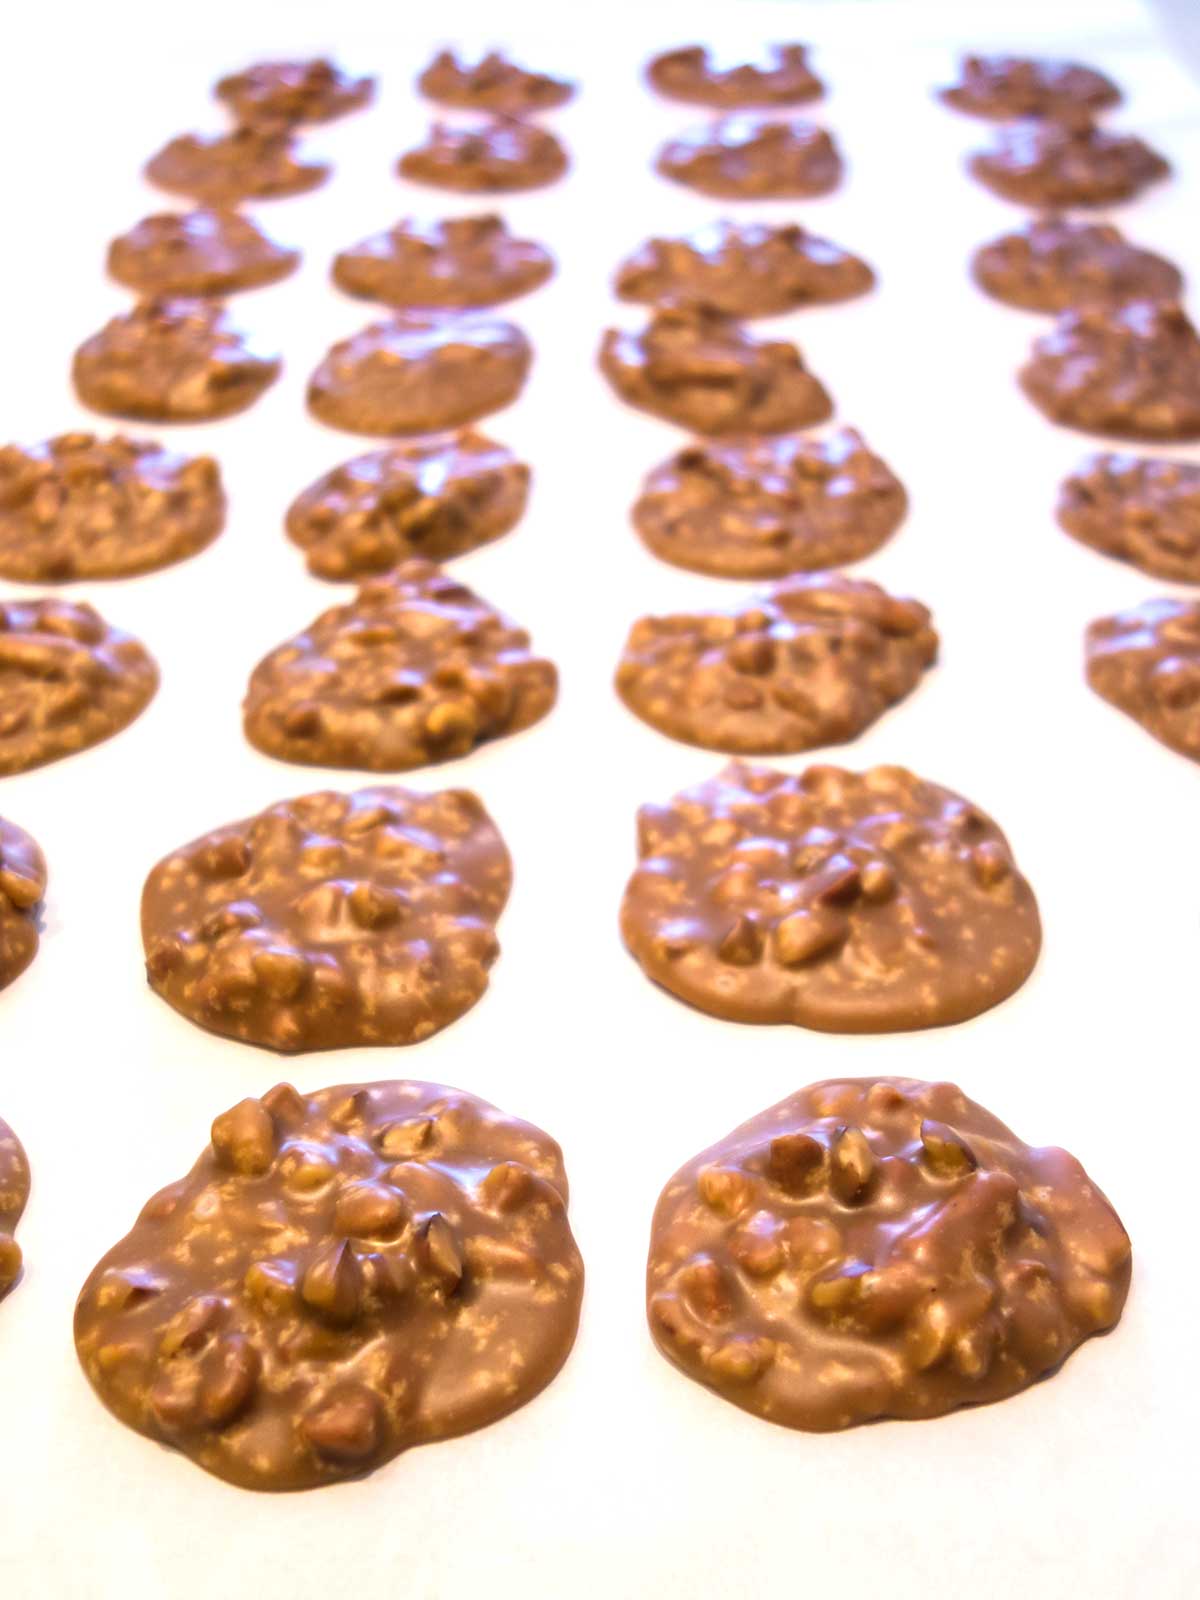 Pralines cooling on parchment paper.